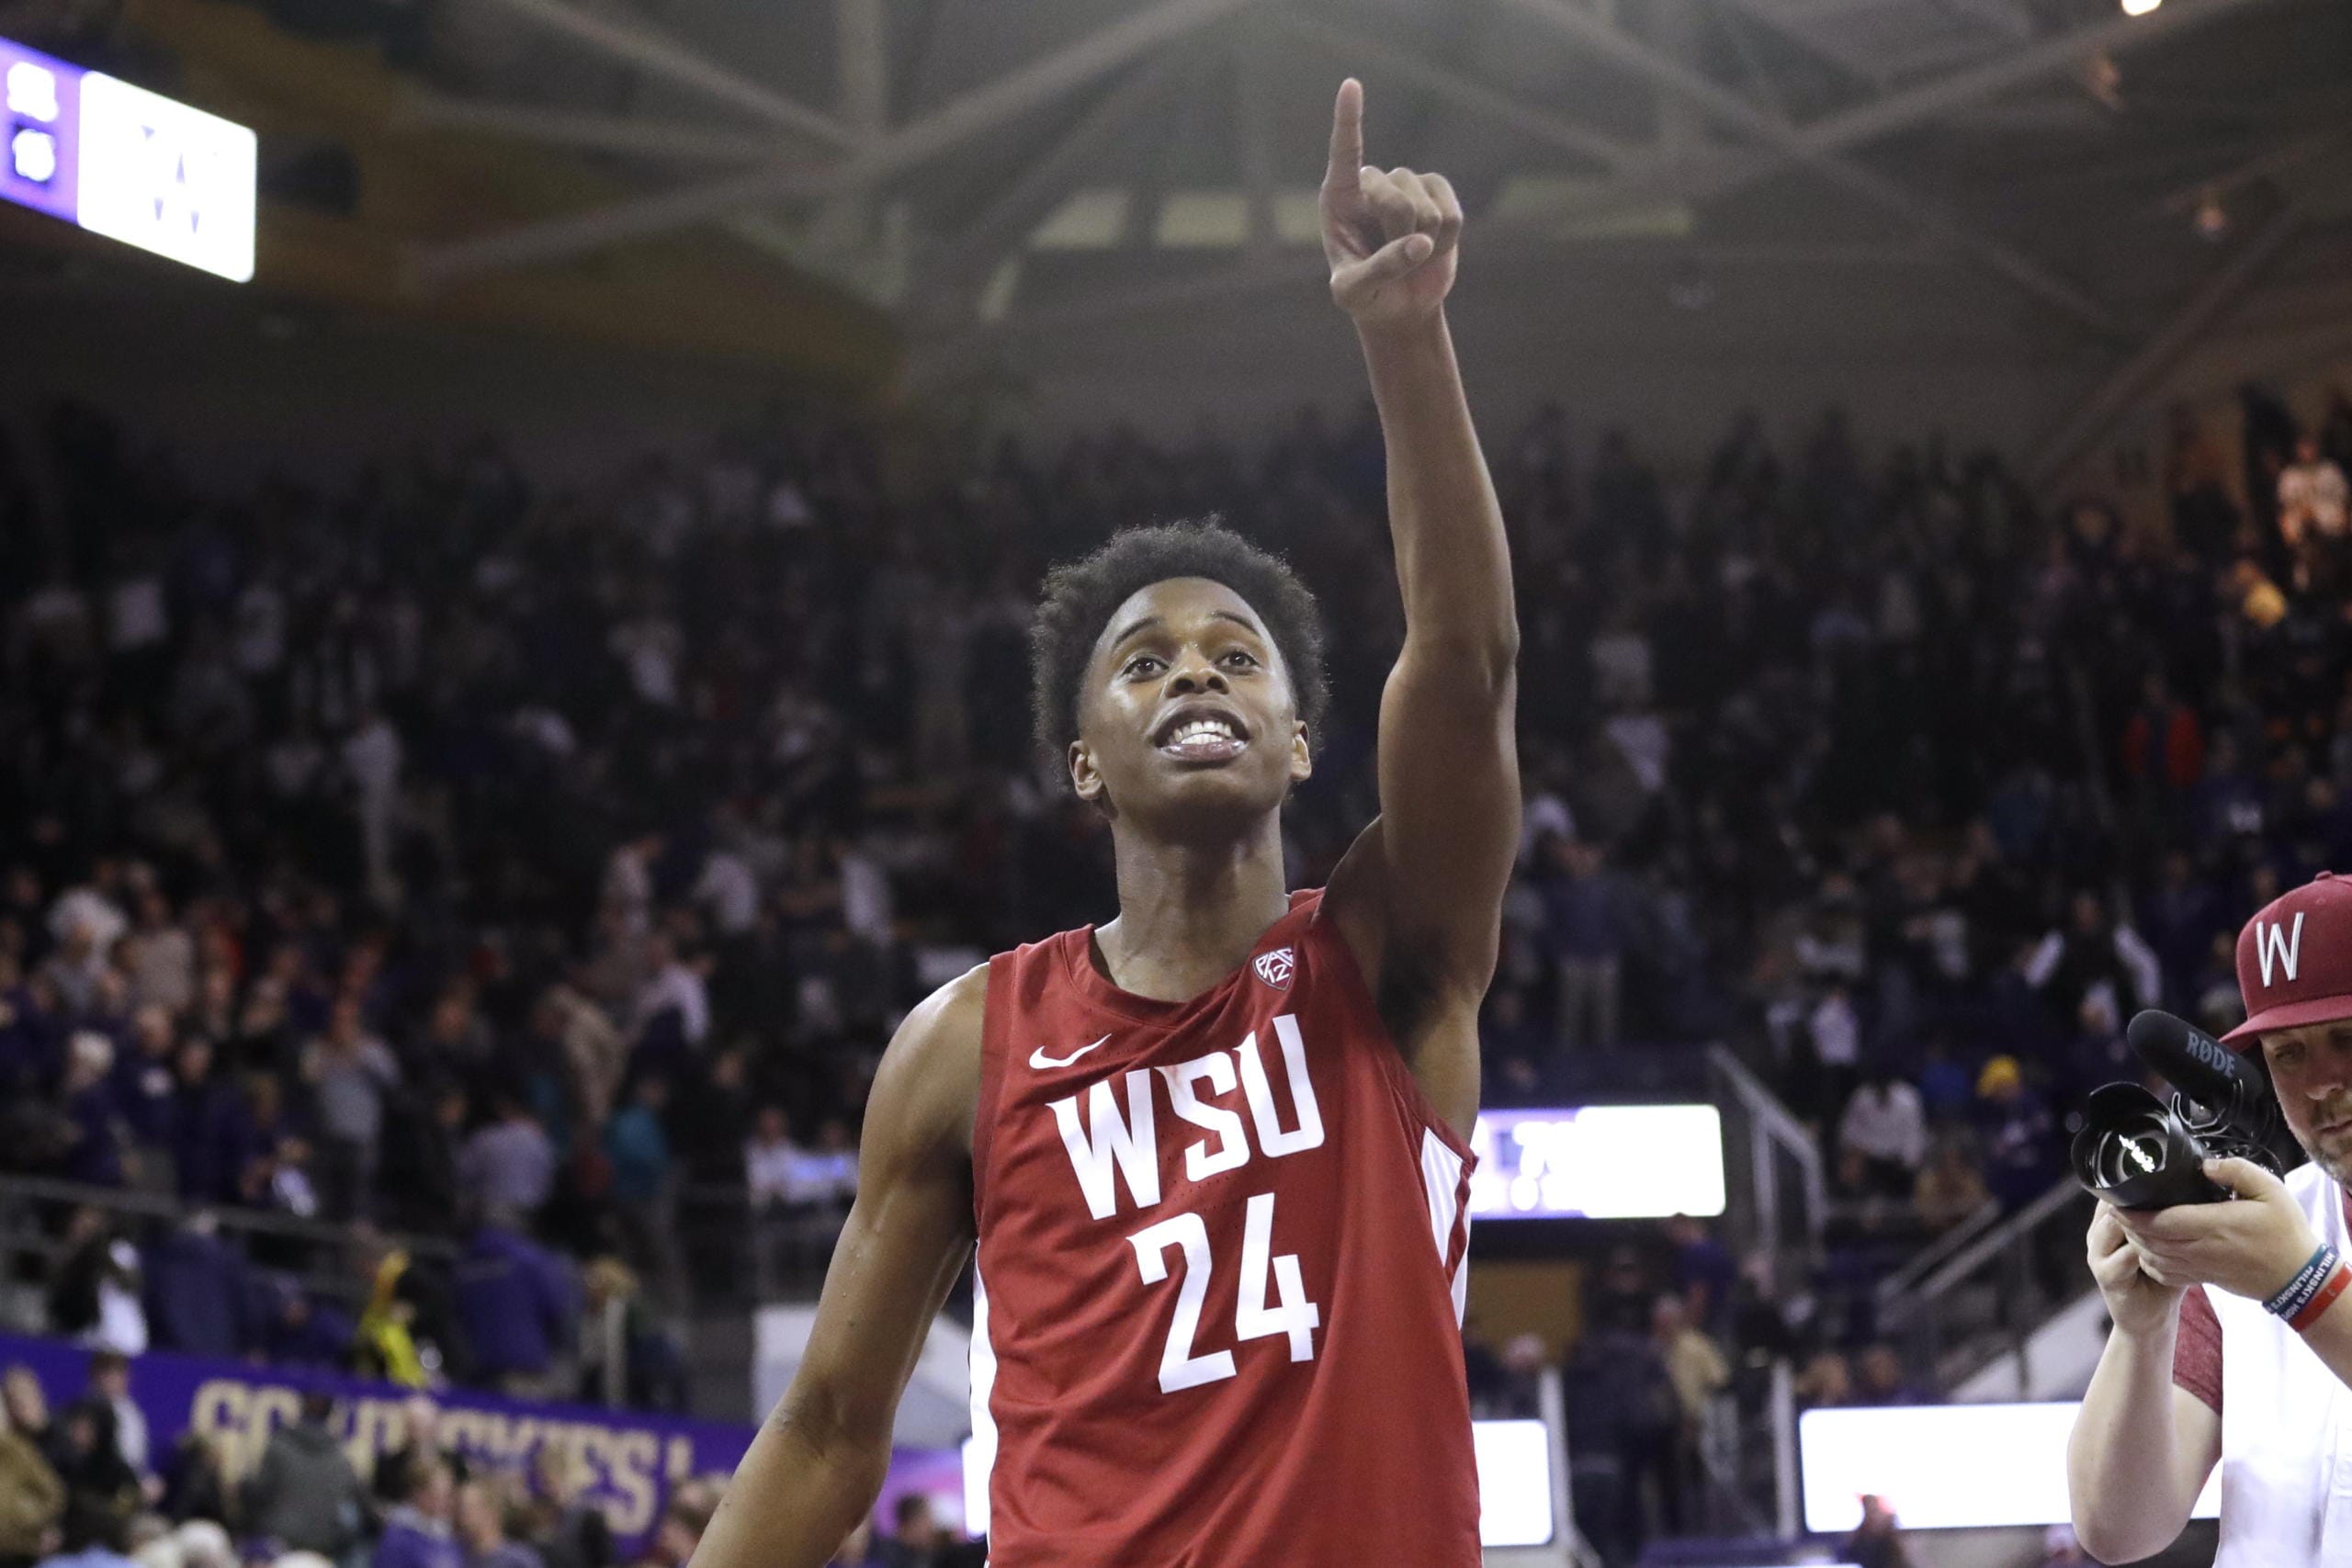 Washington State's Noah Williams points toward the stands after Washington State defeated Washington 78-74 in an NCAA college basketball game Friday, Feb. 28, 2020, in Seattle.